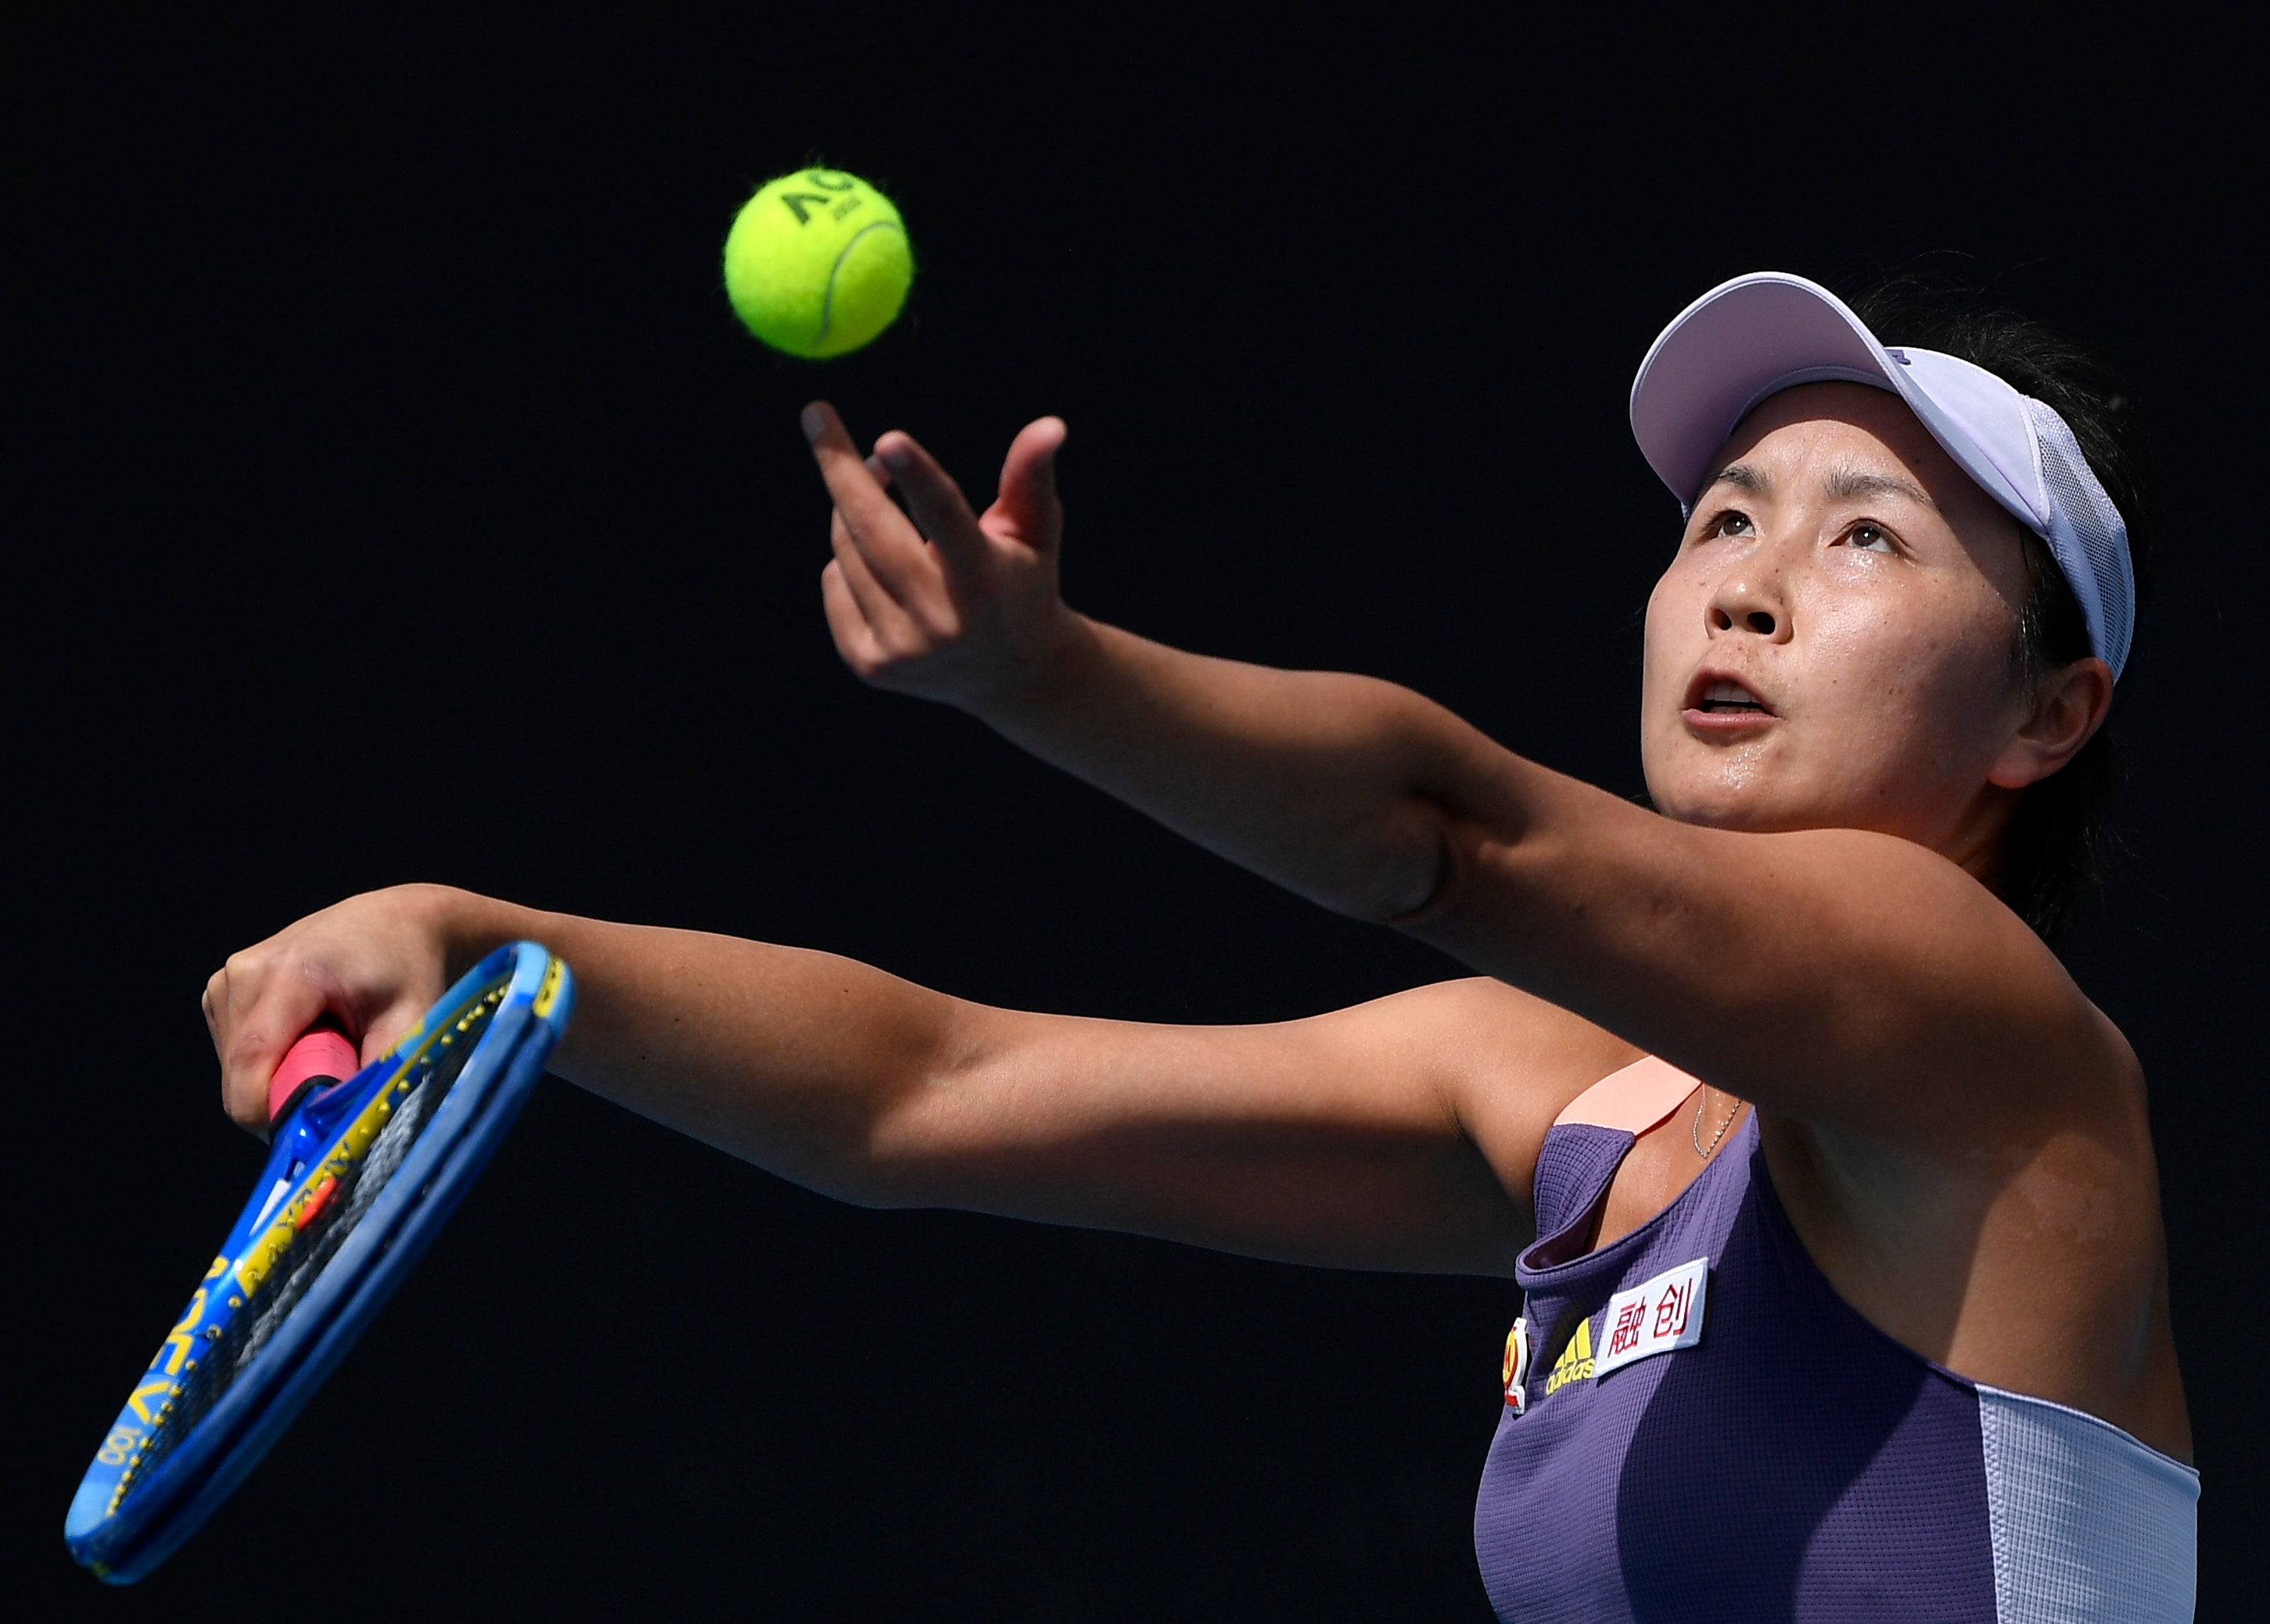 Peng Shuai, Grand Slam doubles champion and three-time Olympian, has not been seen in public for a month now